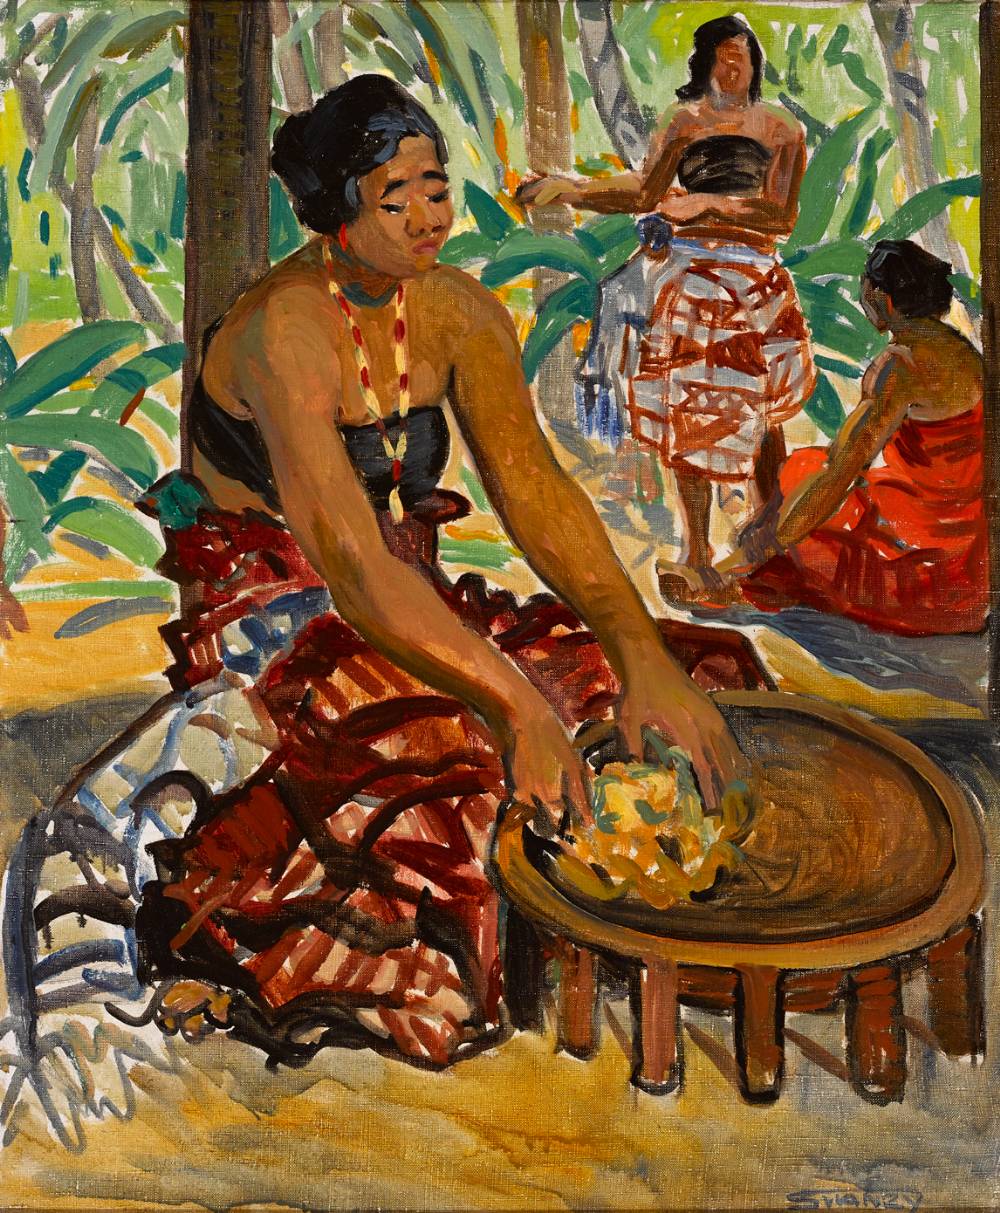 PREPARING THE MEAL, SAMOA, c. 1919-25 by Mary Swanzy sold for 48,000 at Whyte's Auctions